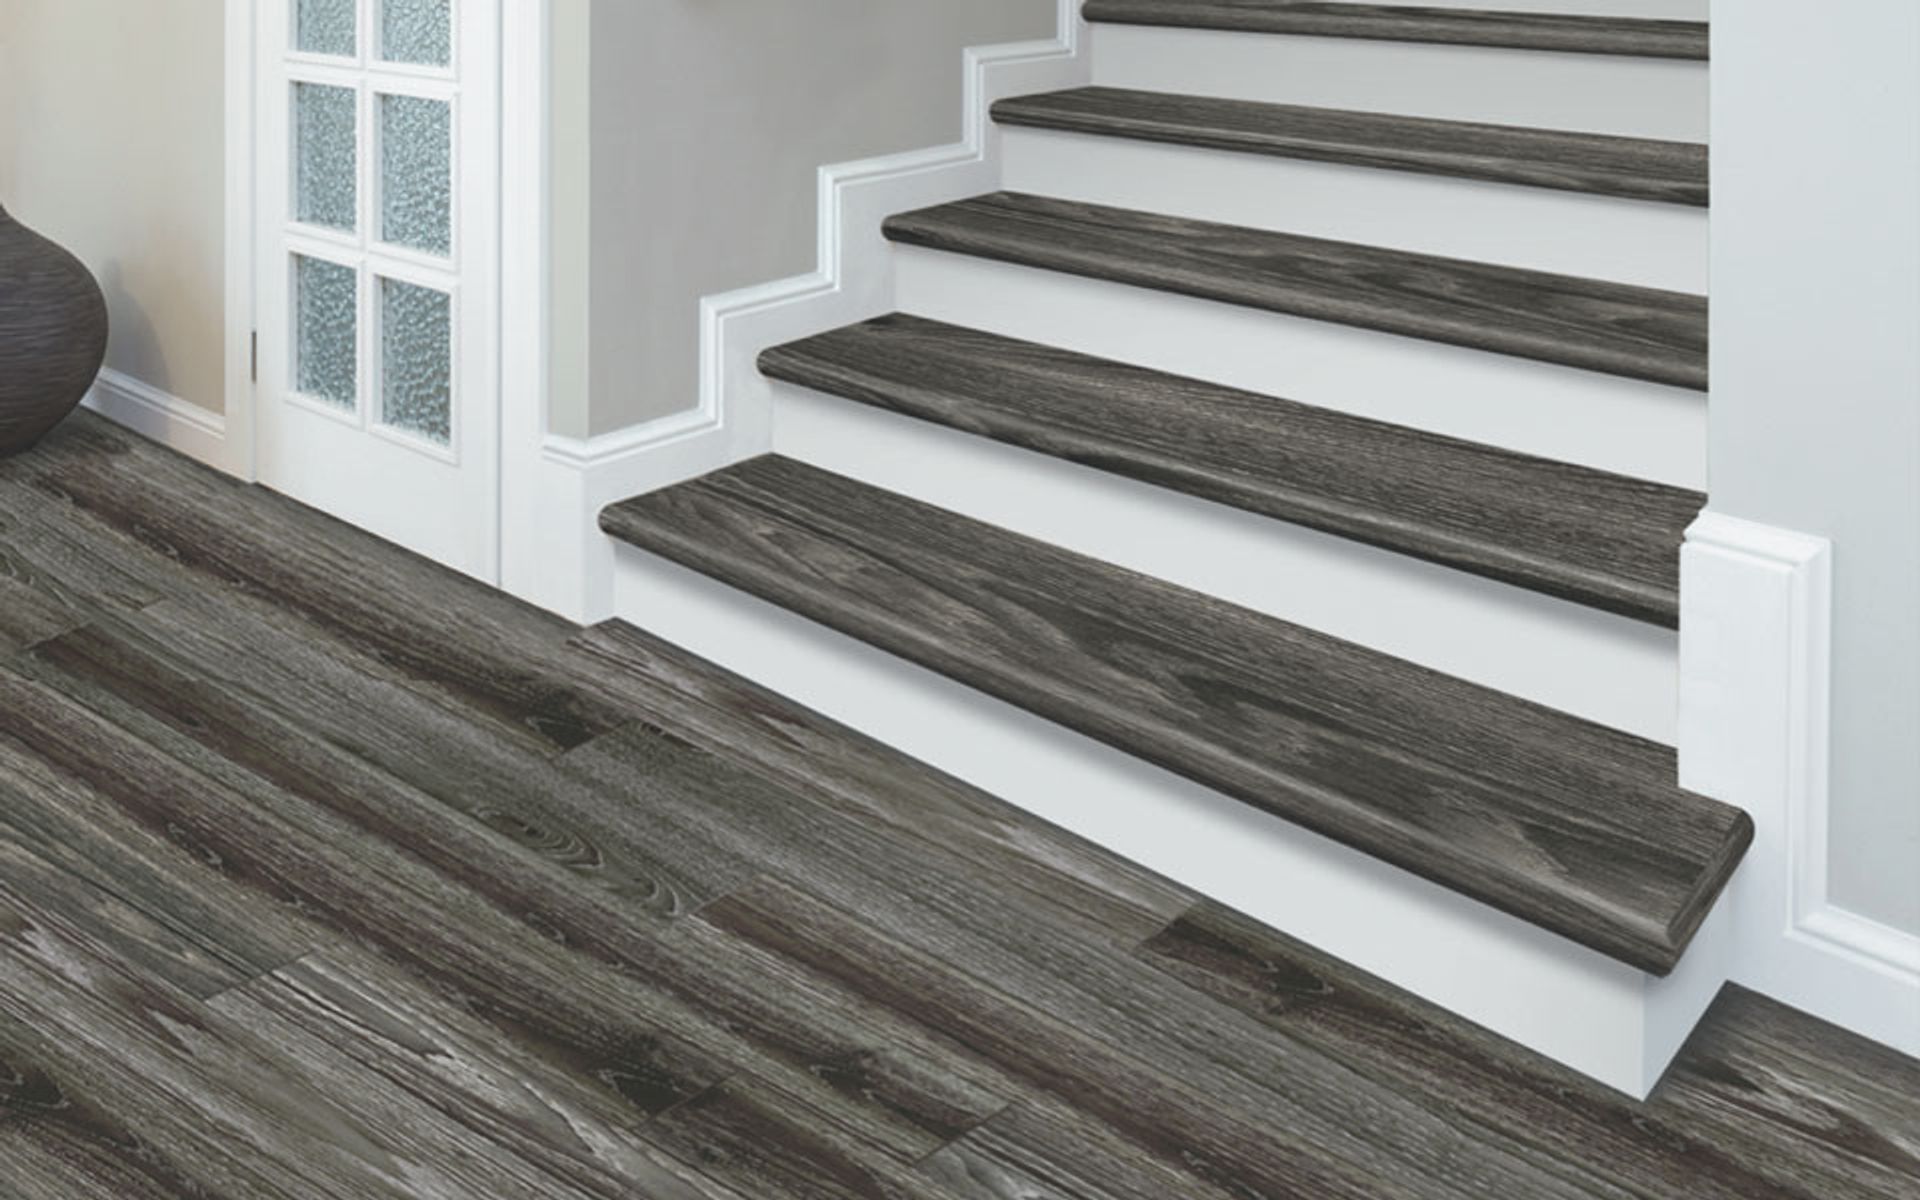 How To Do Vinyl Flooring On Stairs